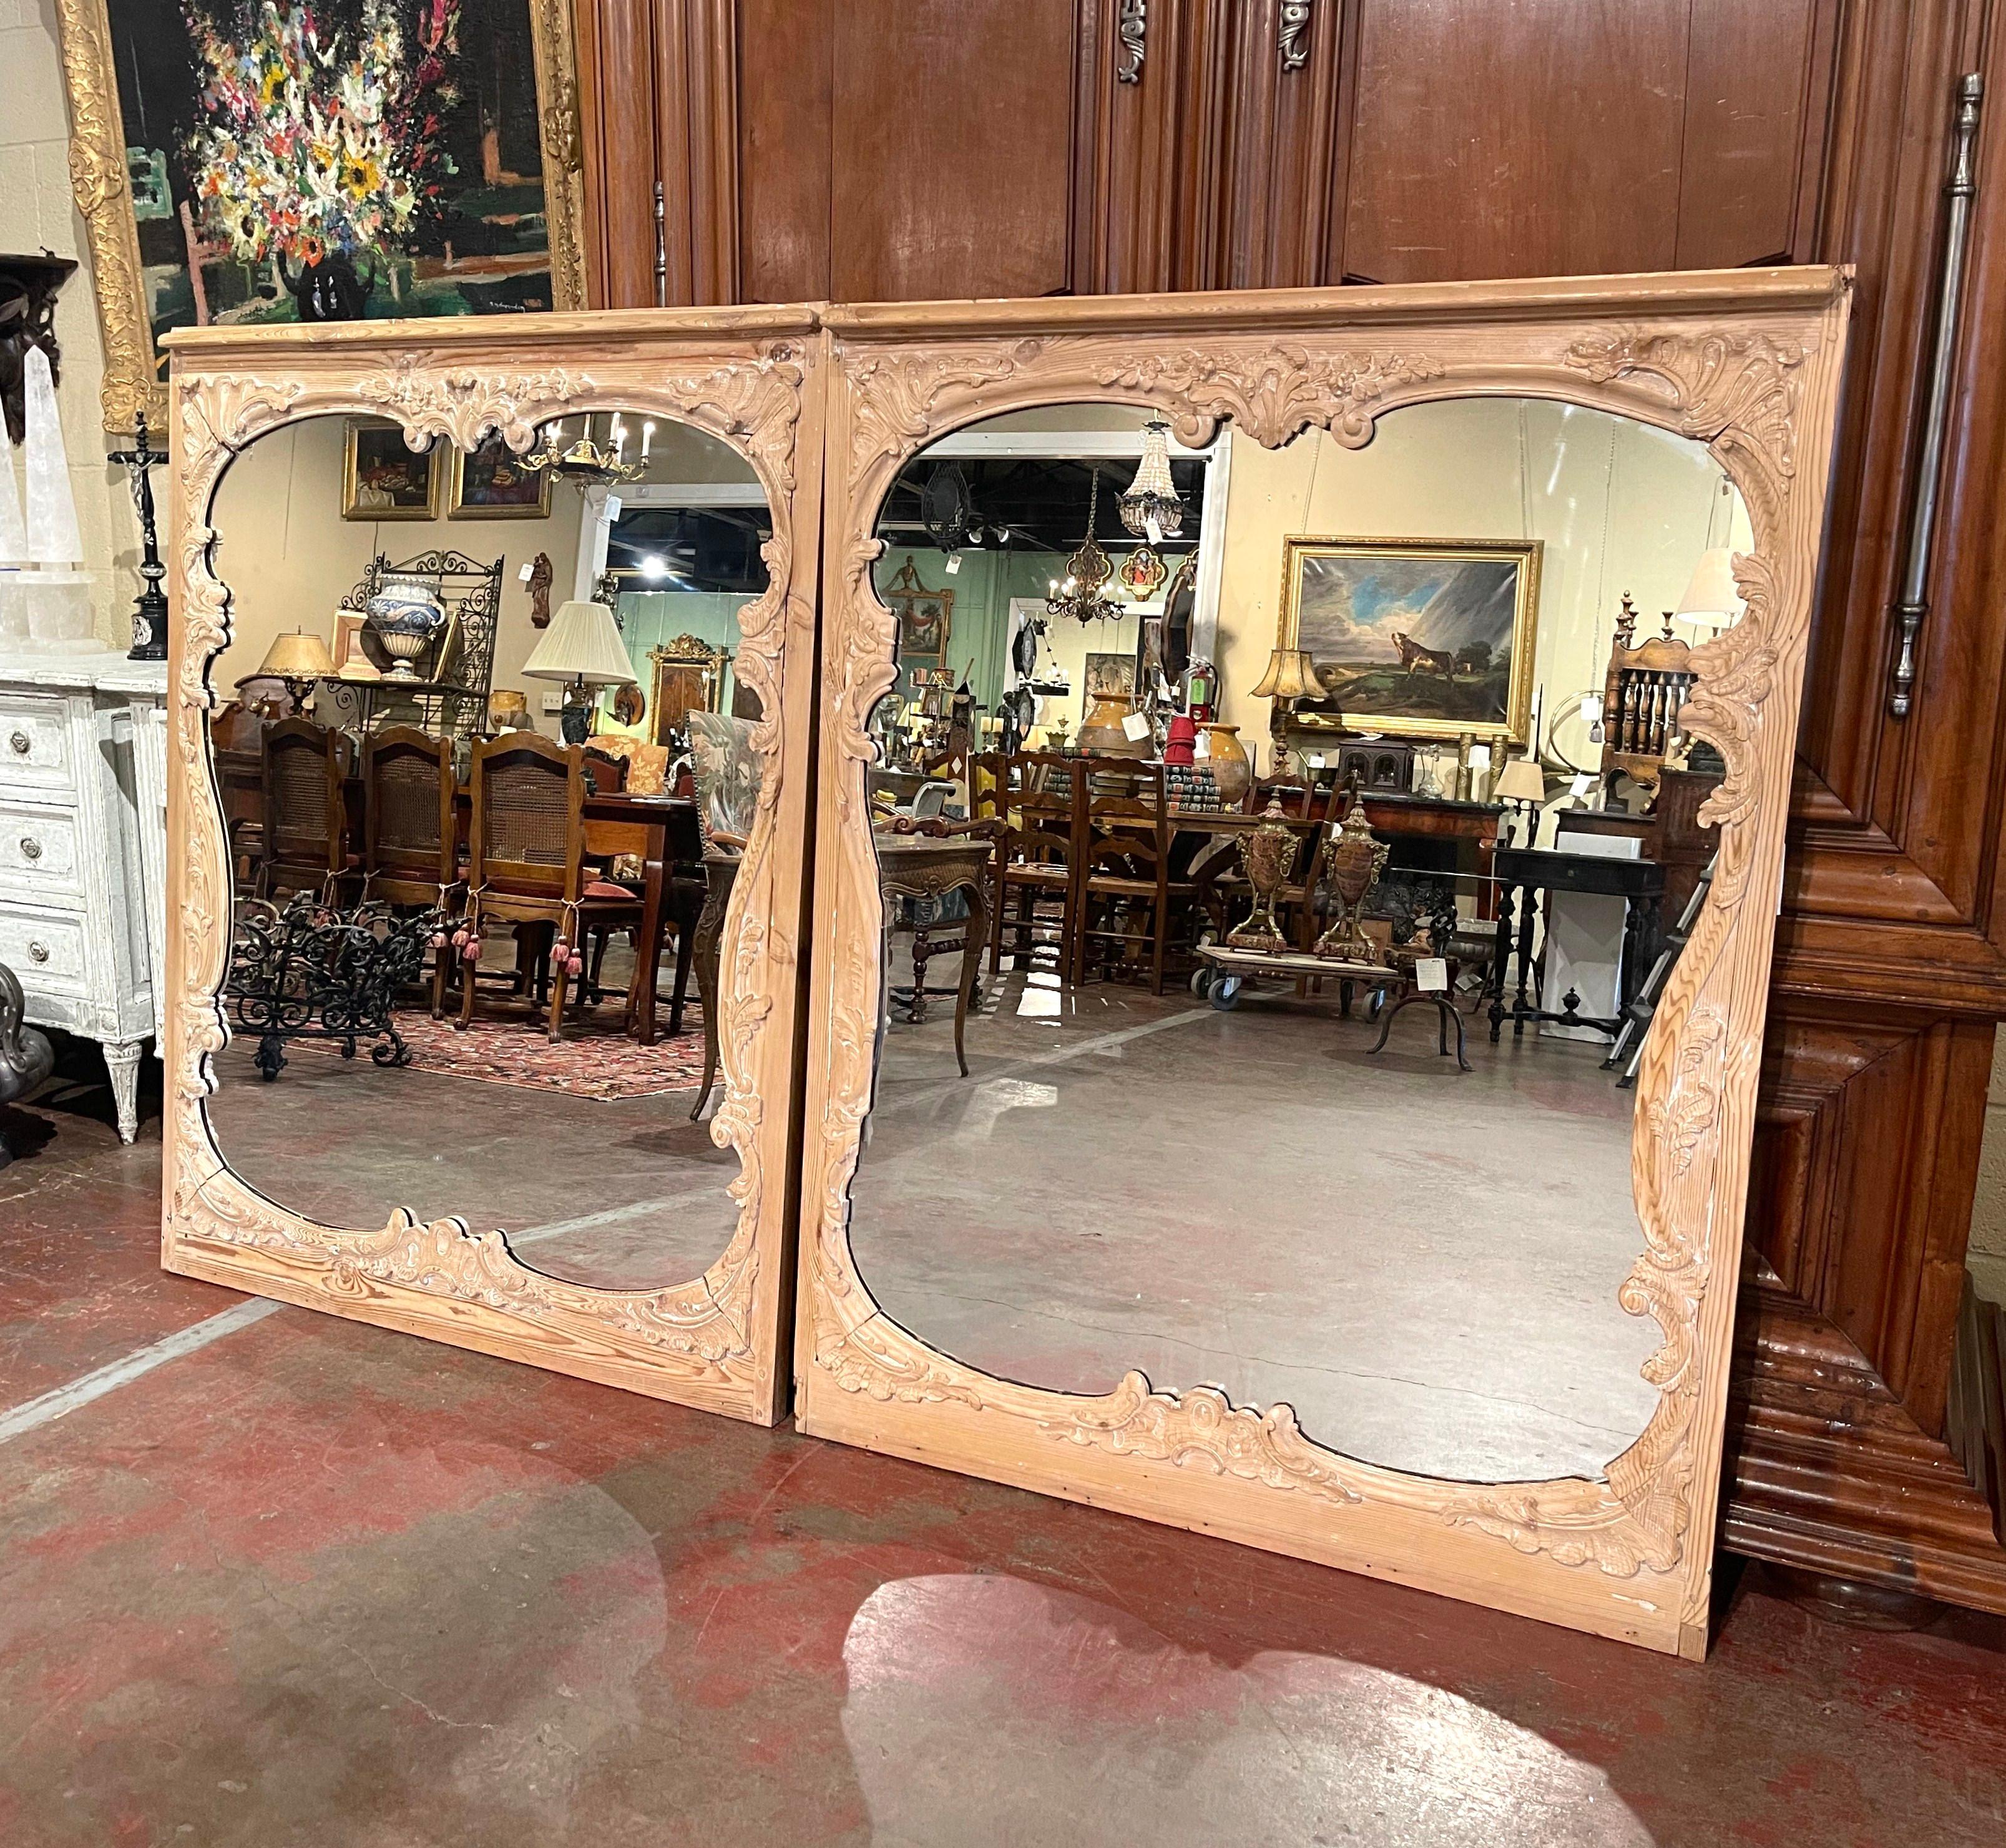 Place these elegant antique mirrors over a pair of consoles or chests in entryway! Crafted in France circa 1880 and made of pine wood, each rectangular wall mirror features hand carved floral and leaf motifs throughout. Both Rococo mirrors are in